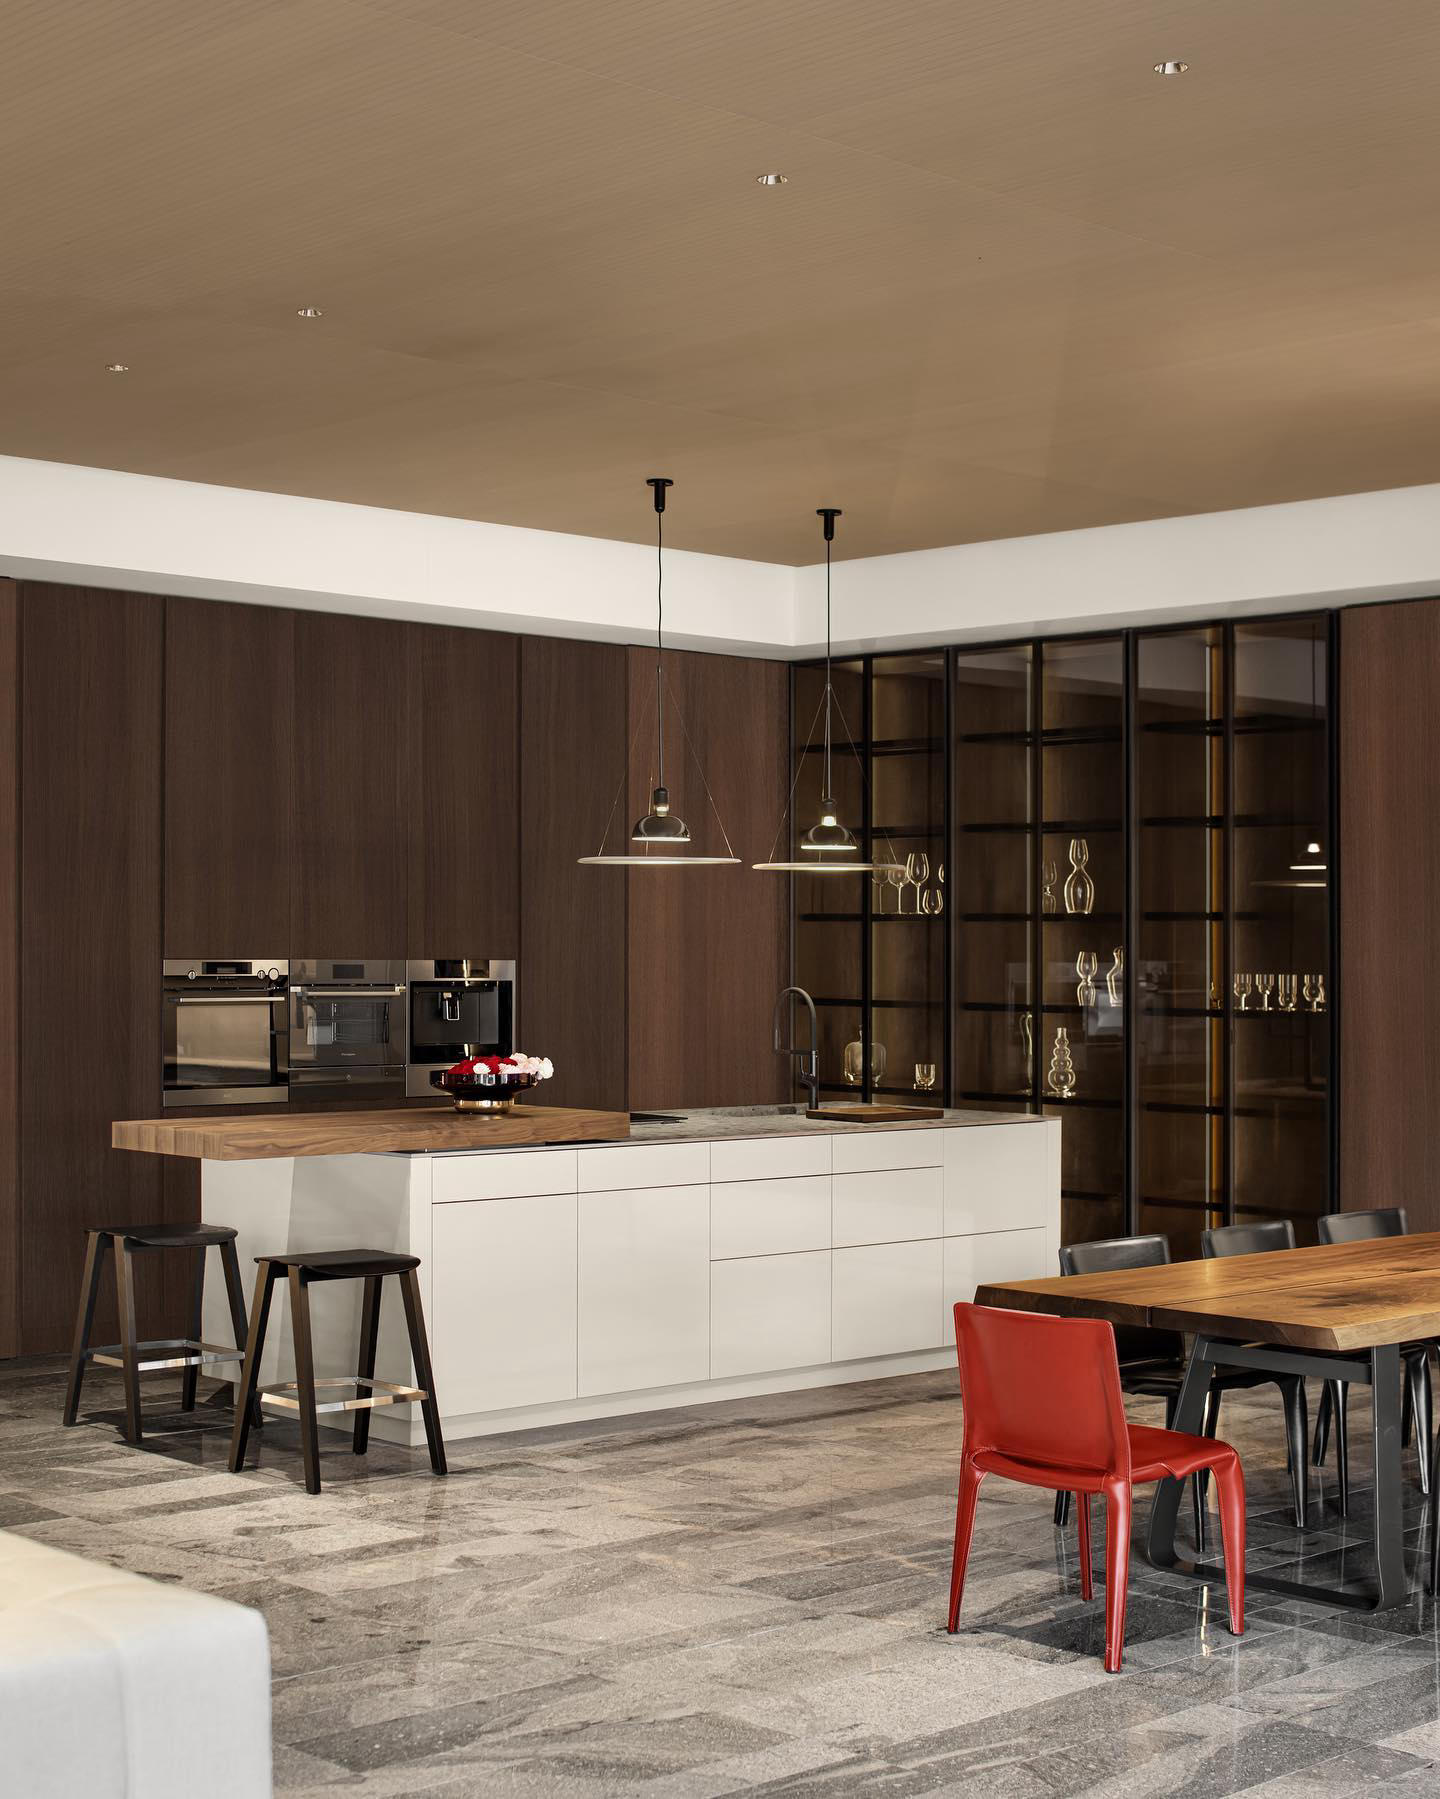 image  1 Dark stained oak sets the tone, creating a stylish statement with a strong connection to nature righ